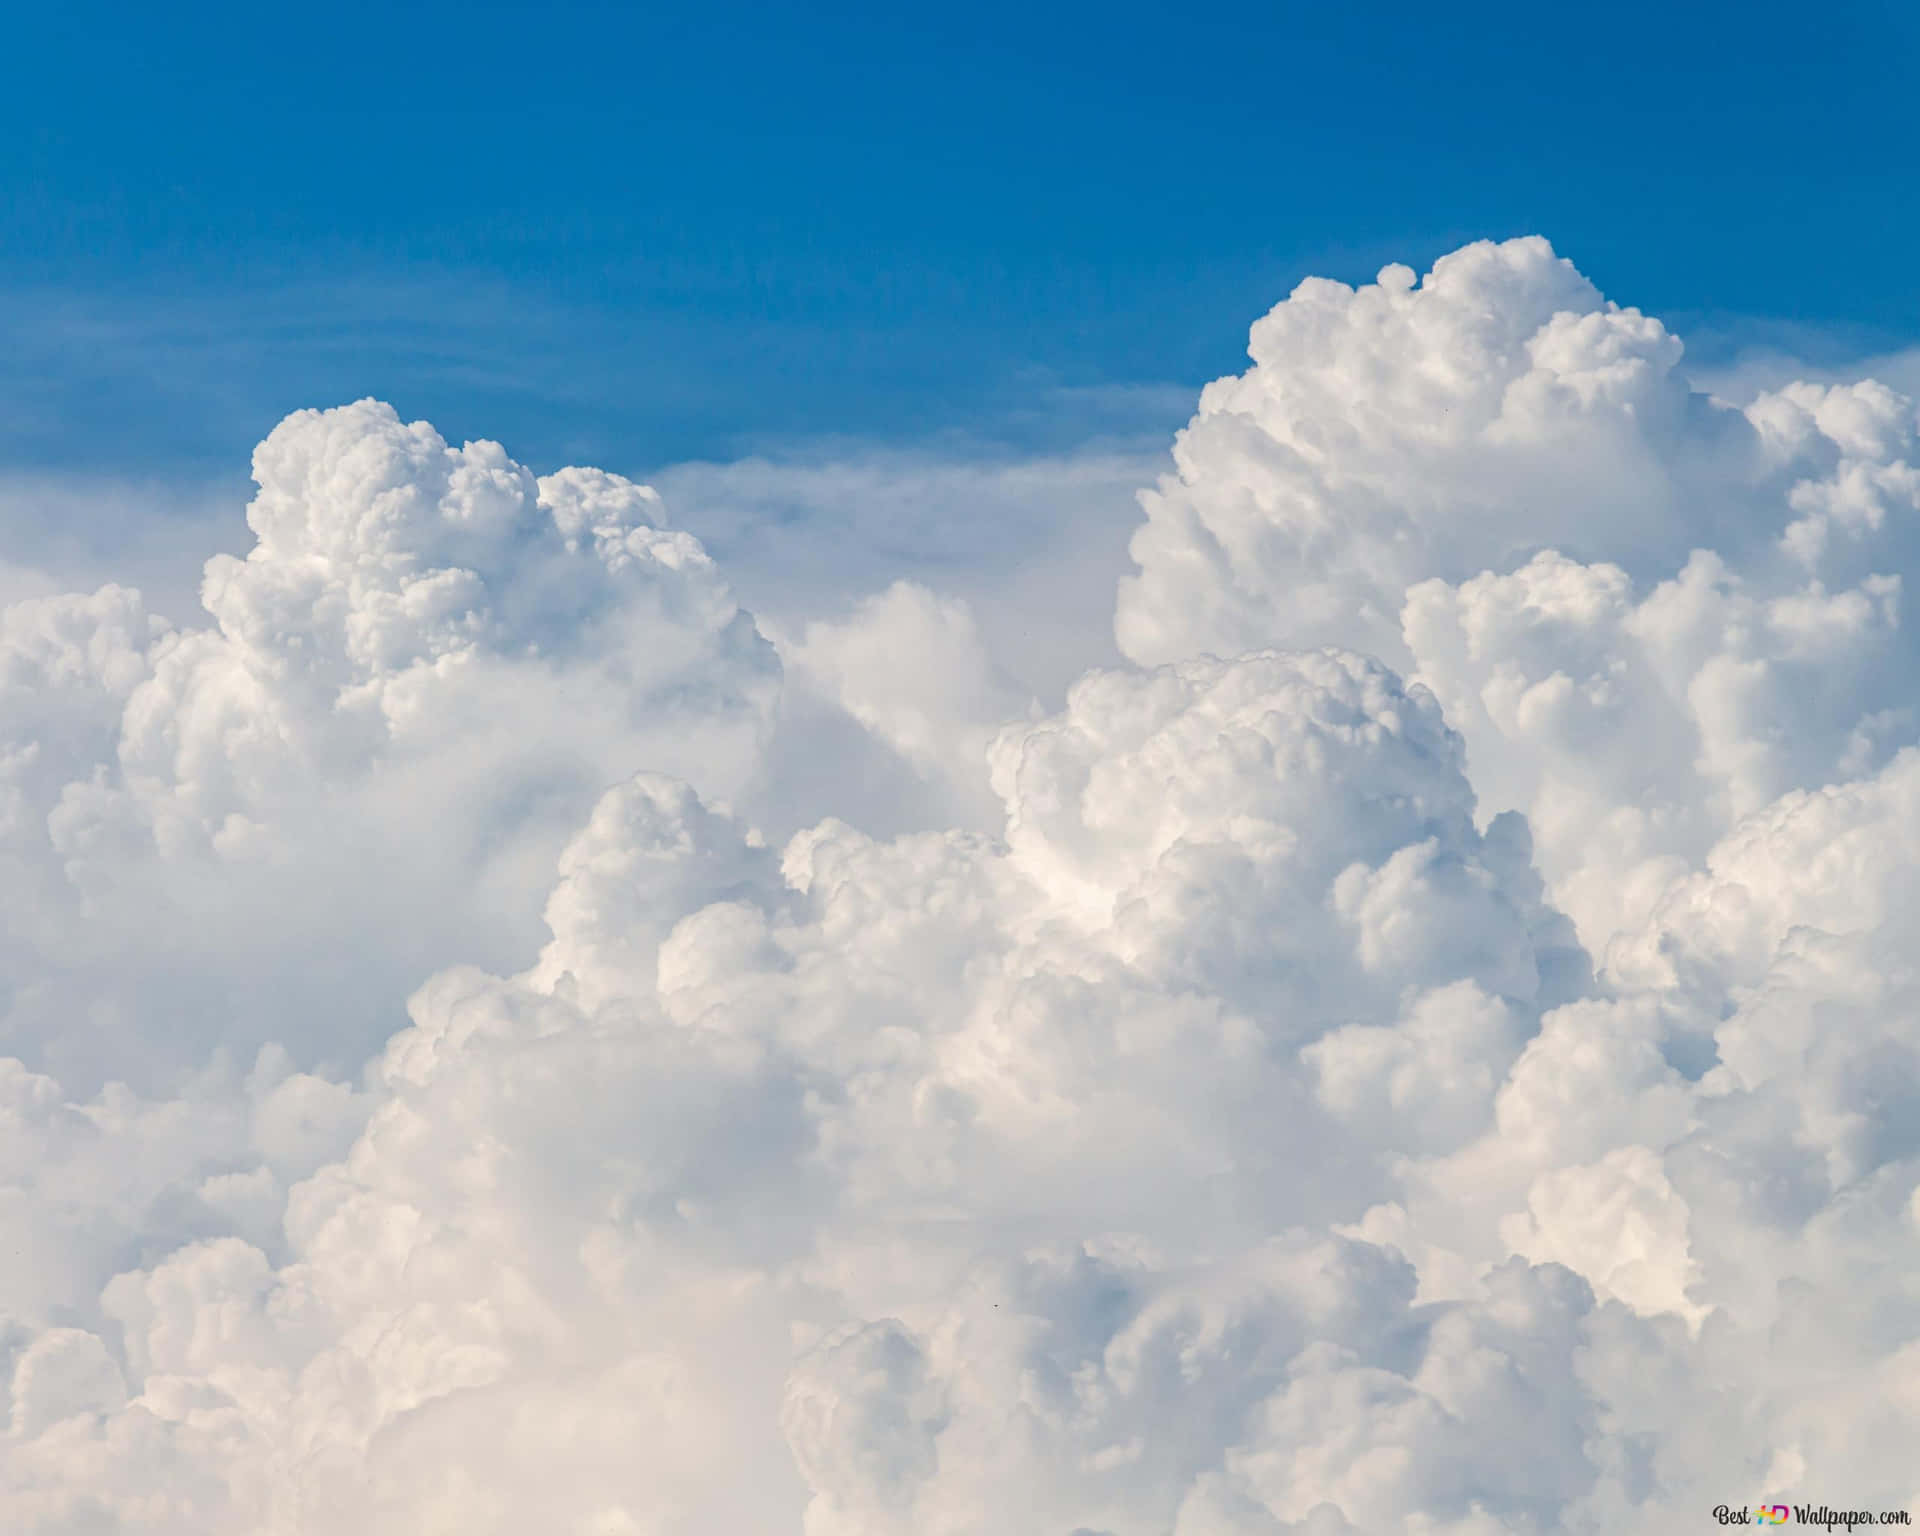 White clouds in an infinite blue sky Wallpaper